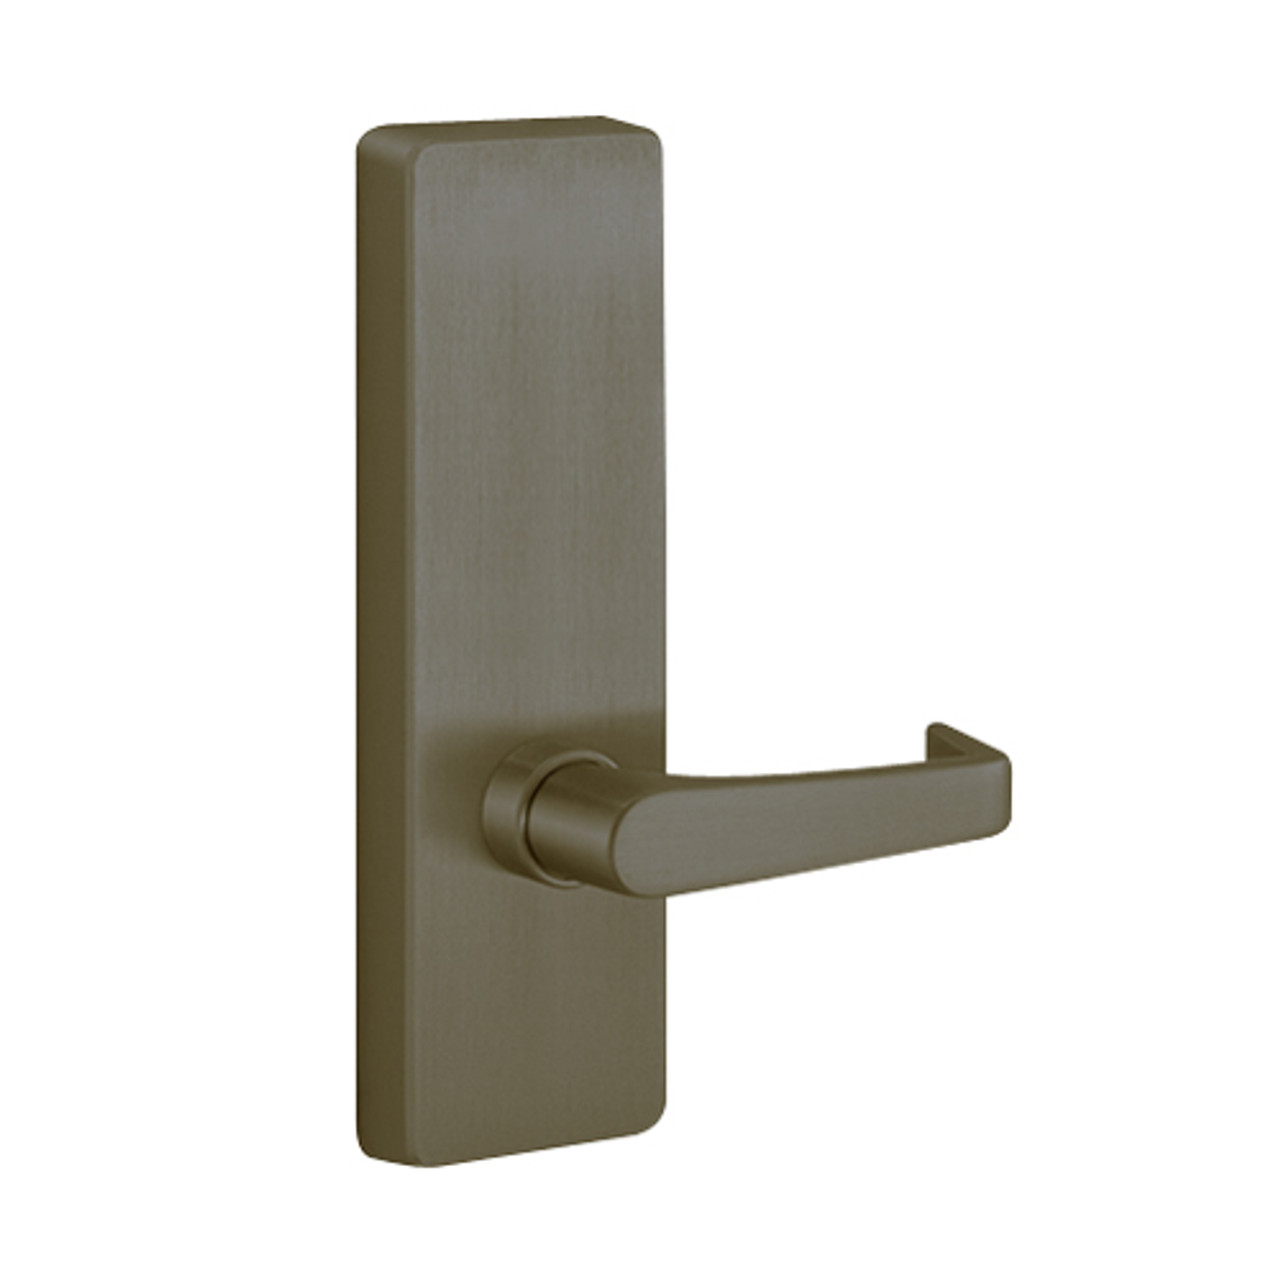 4902A-613-LHR PHI Dummy Trim with A Lever Design for Apex and Olympian Series Exit Device in Oil Rubbed Bronze Finish